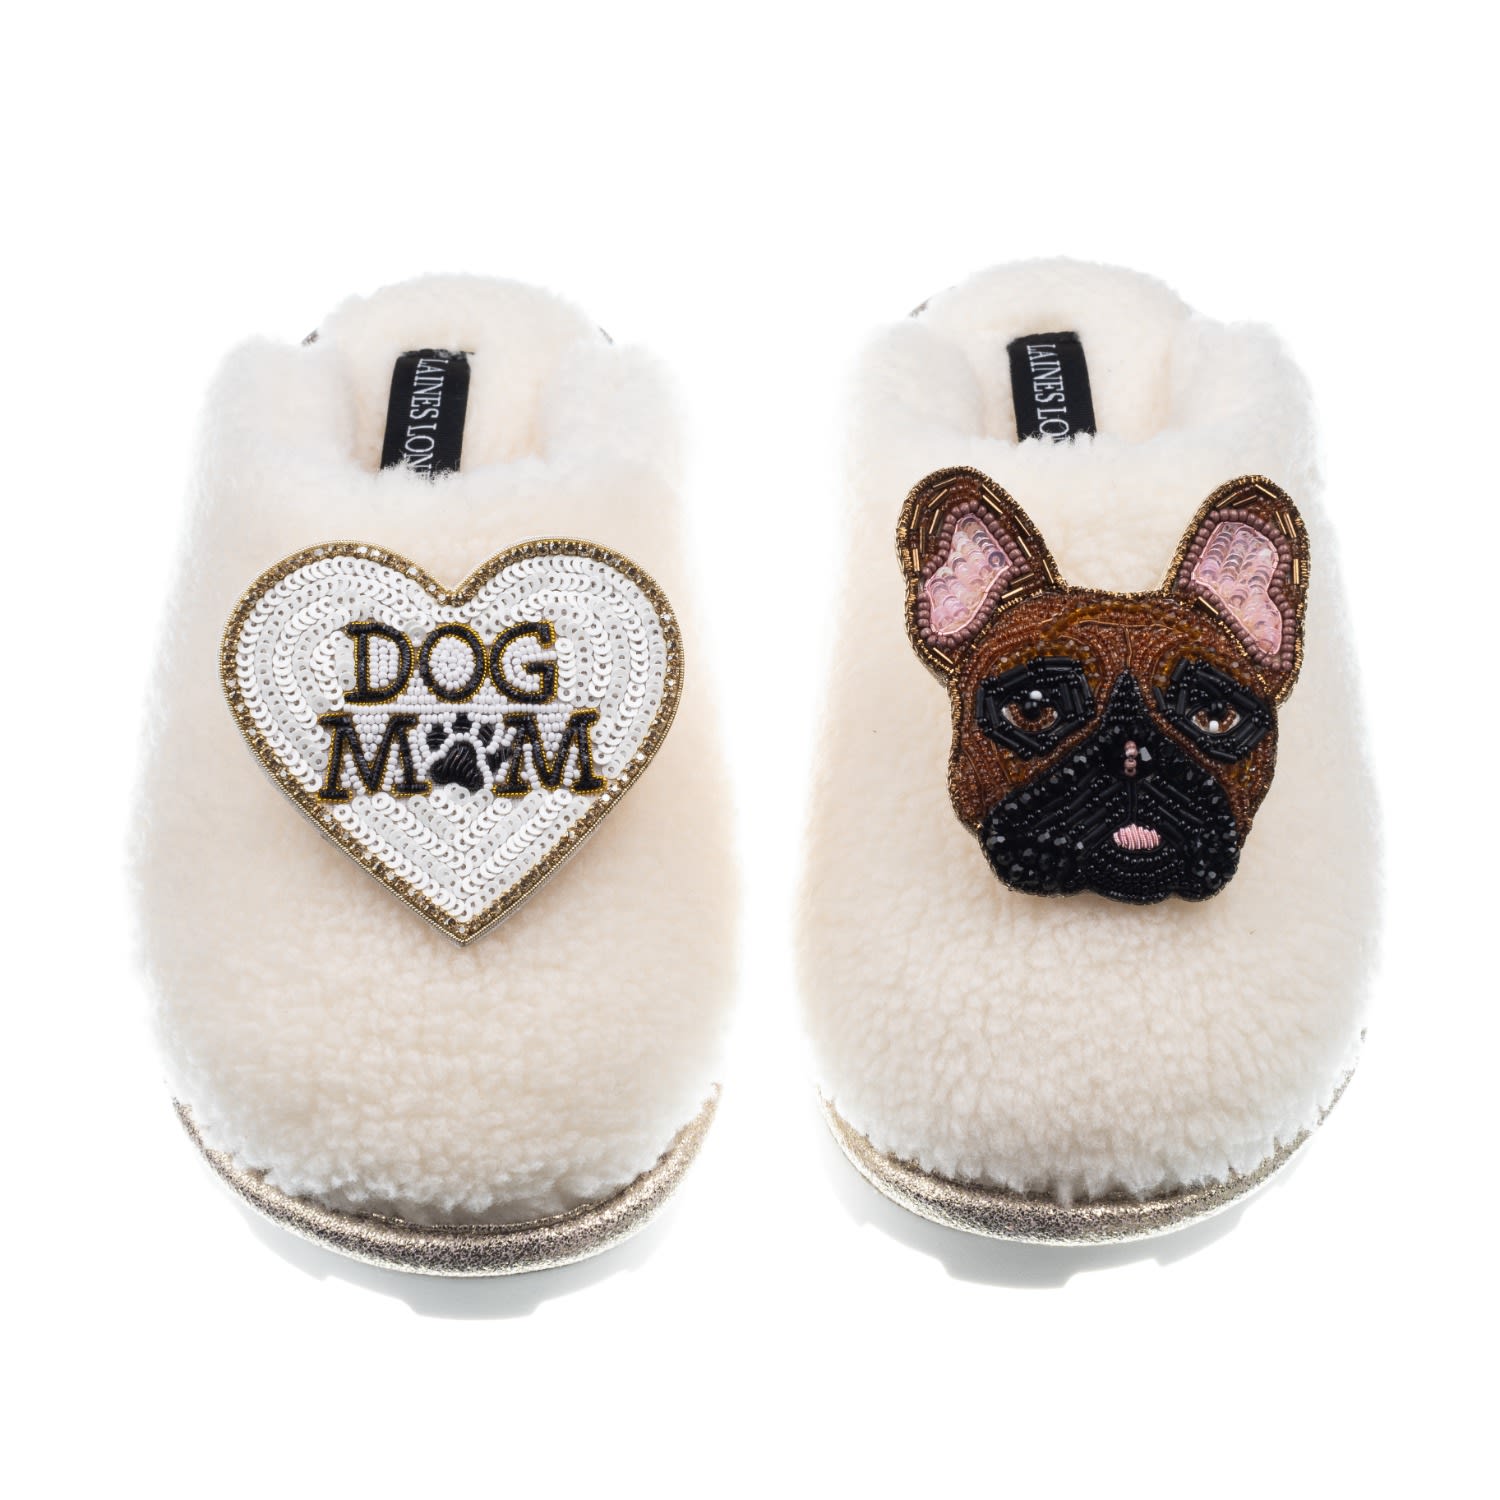 Laines London Women's White Teddy Closed Toe Slippers With Cookie The Frenchie & Dog Mum / Mom Brooches - Cream